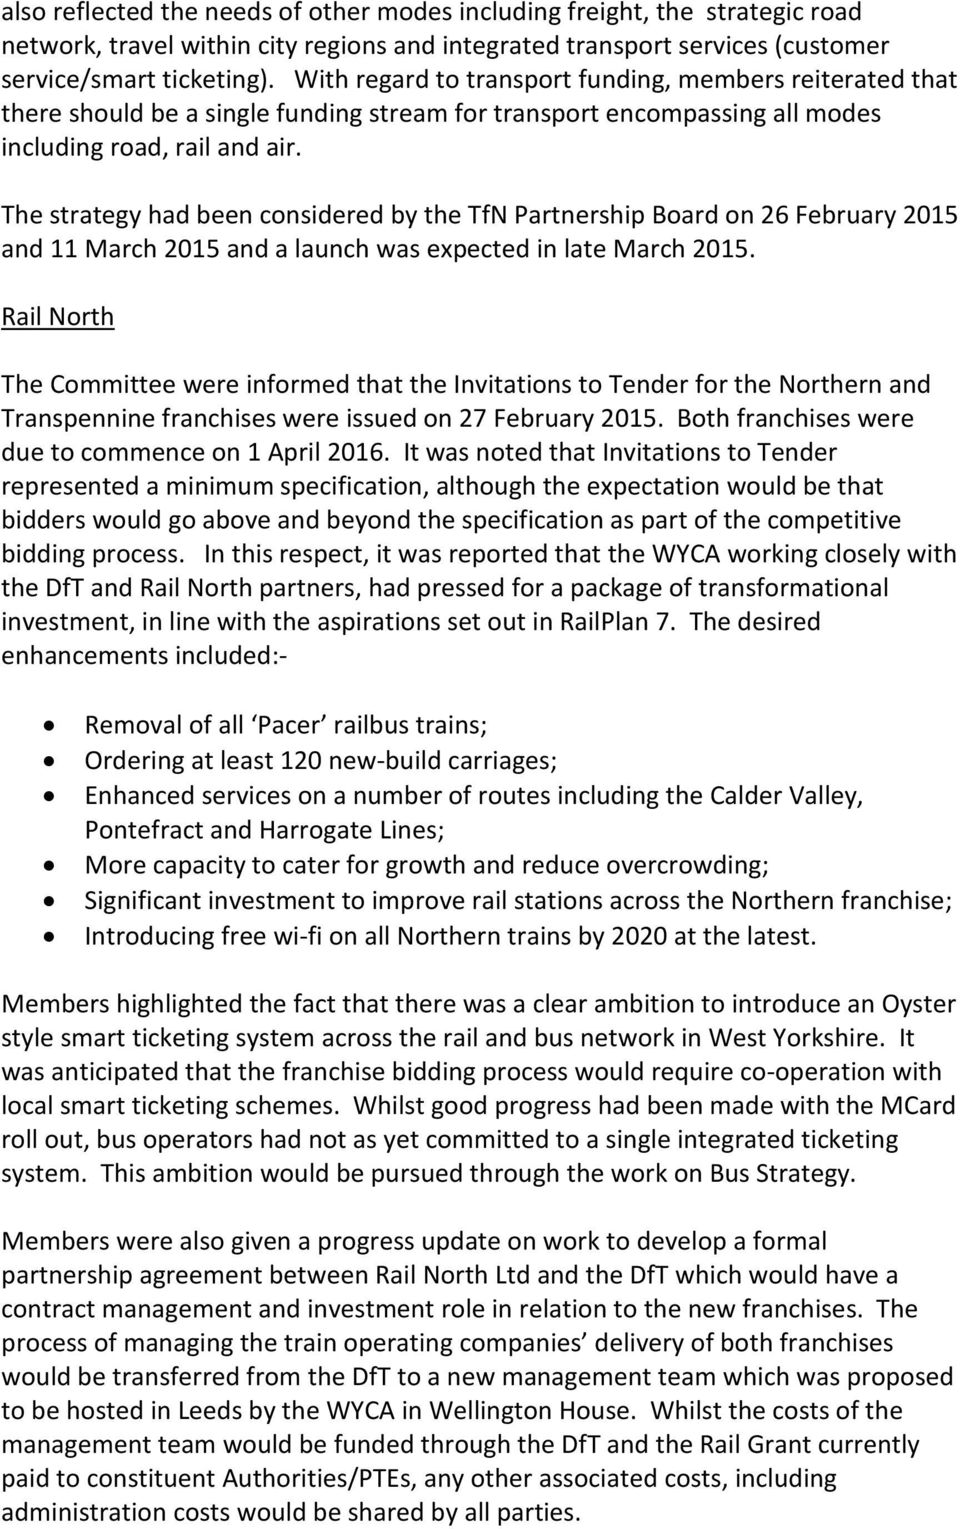 The strategy had been considered by the TfN Partnership Board on 26 February 2015 and 11 March 2015 and a launch was expected in late March 2015.